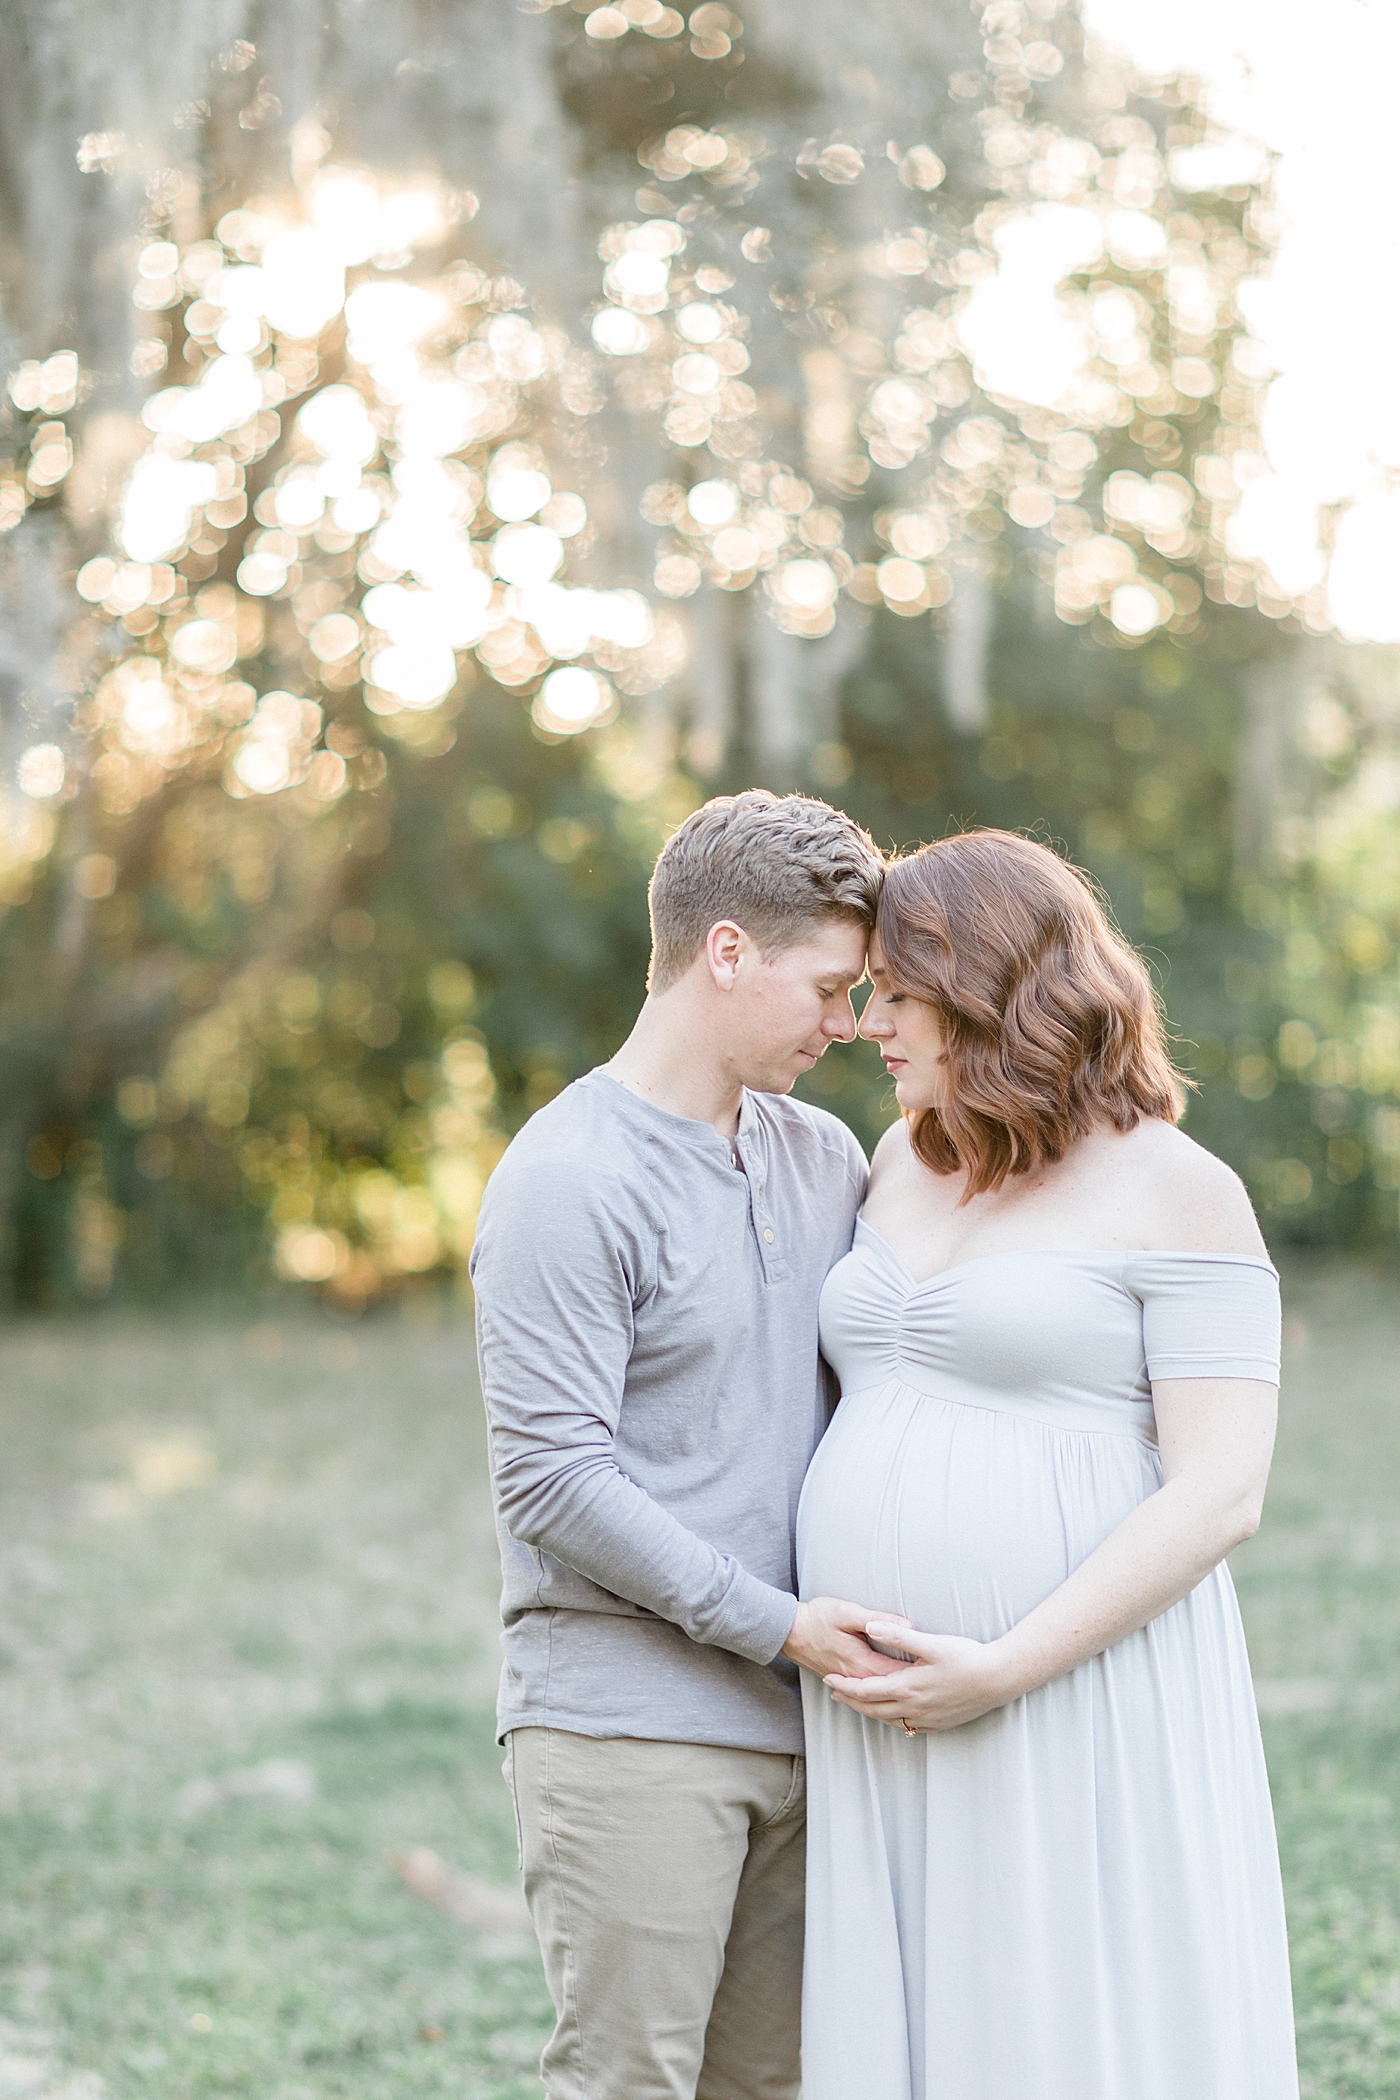 Sunset maternity session under the oaks in Tampa, FL. Photo by Brittany Elise Photography.